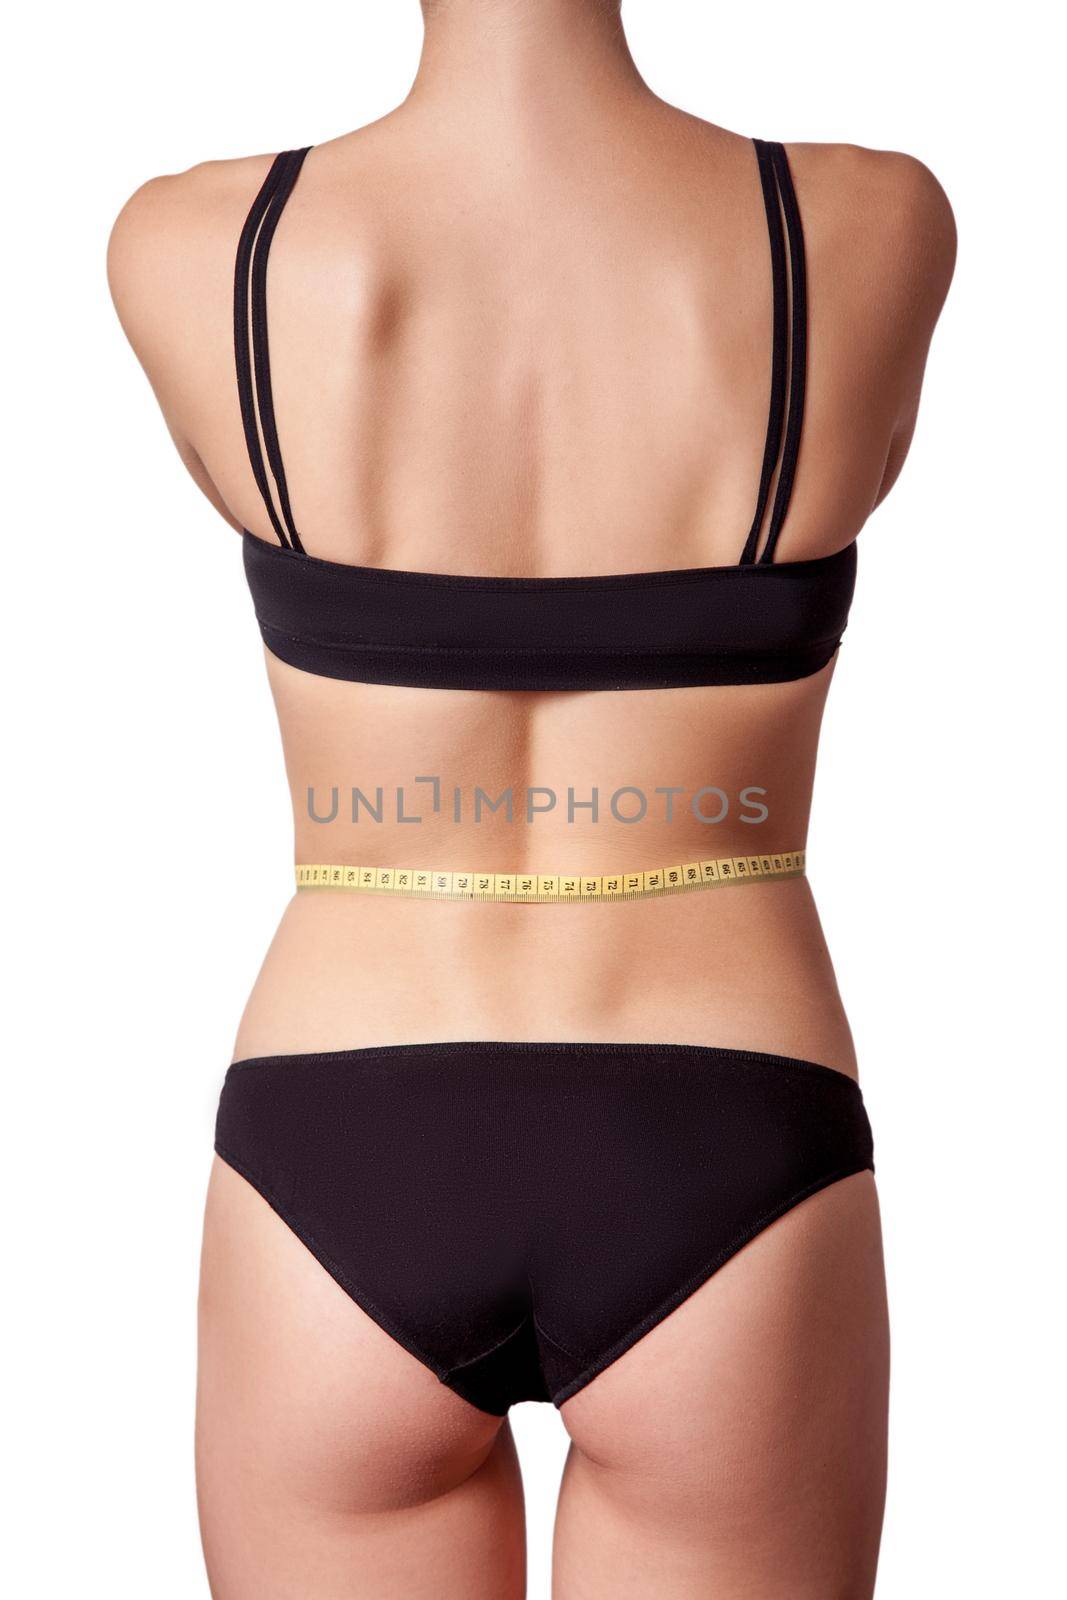 Slim fit happy young woman with measure tape measuring her waist with black underwear by Khosro1